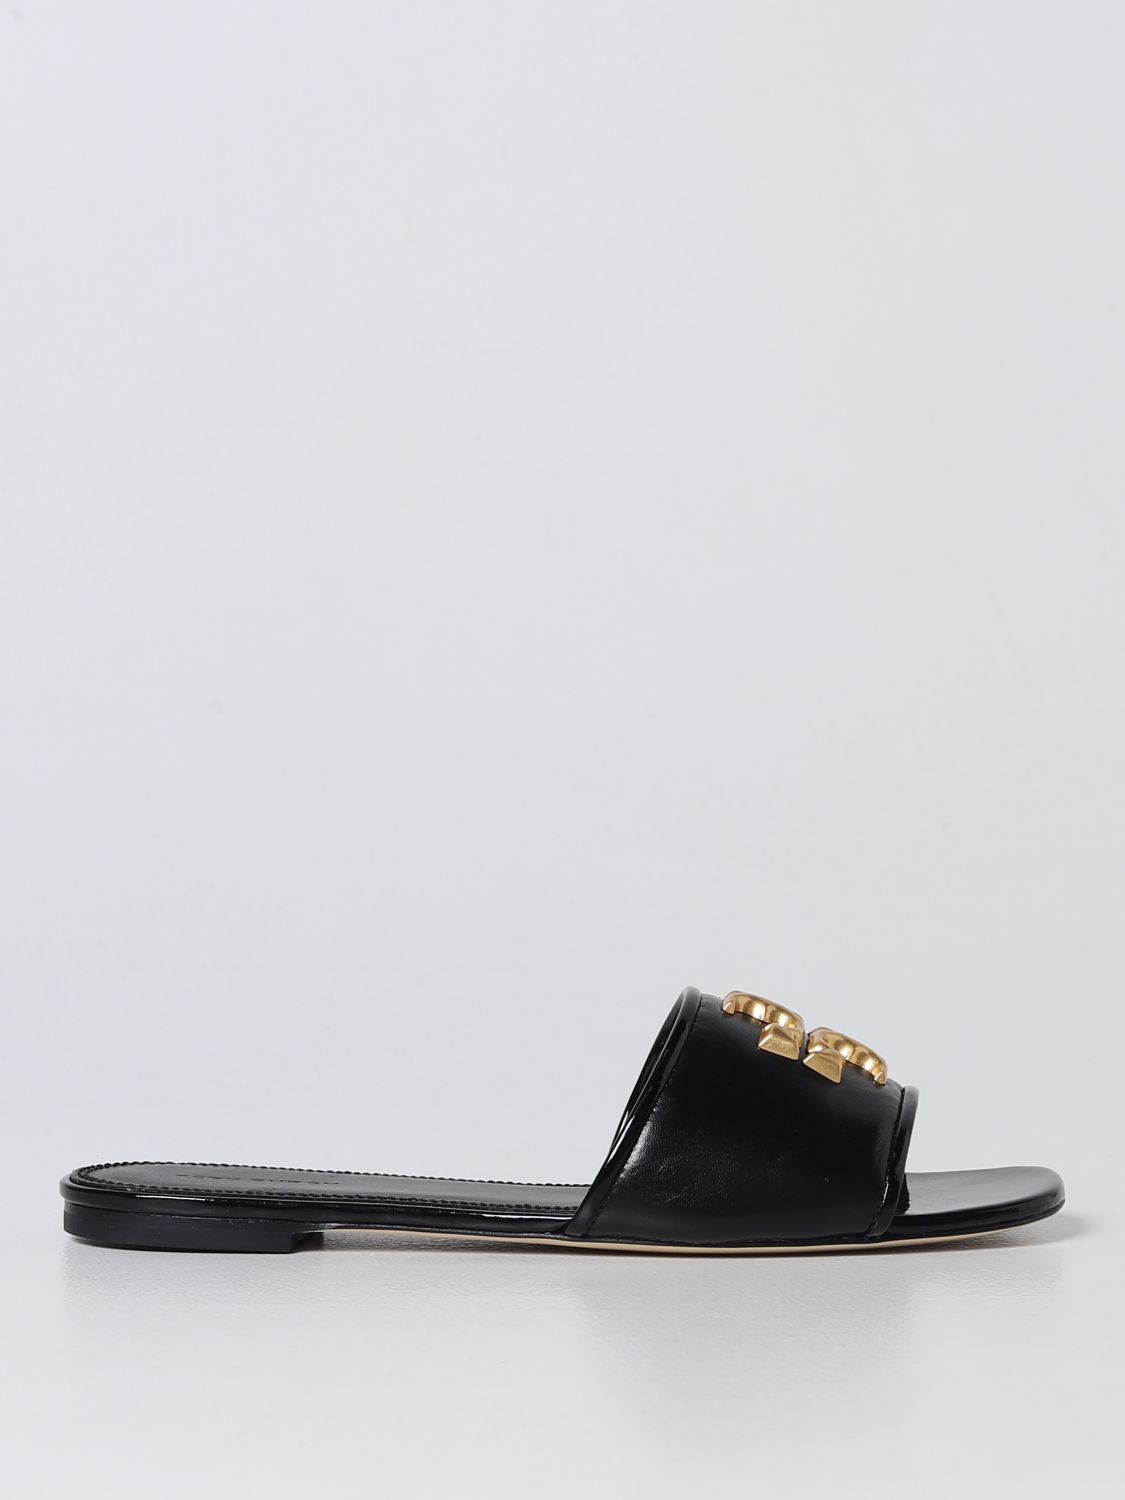 TORY BURCH ELEANOR SLIDES IN SHINY LEATHER,D89312002